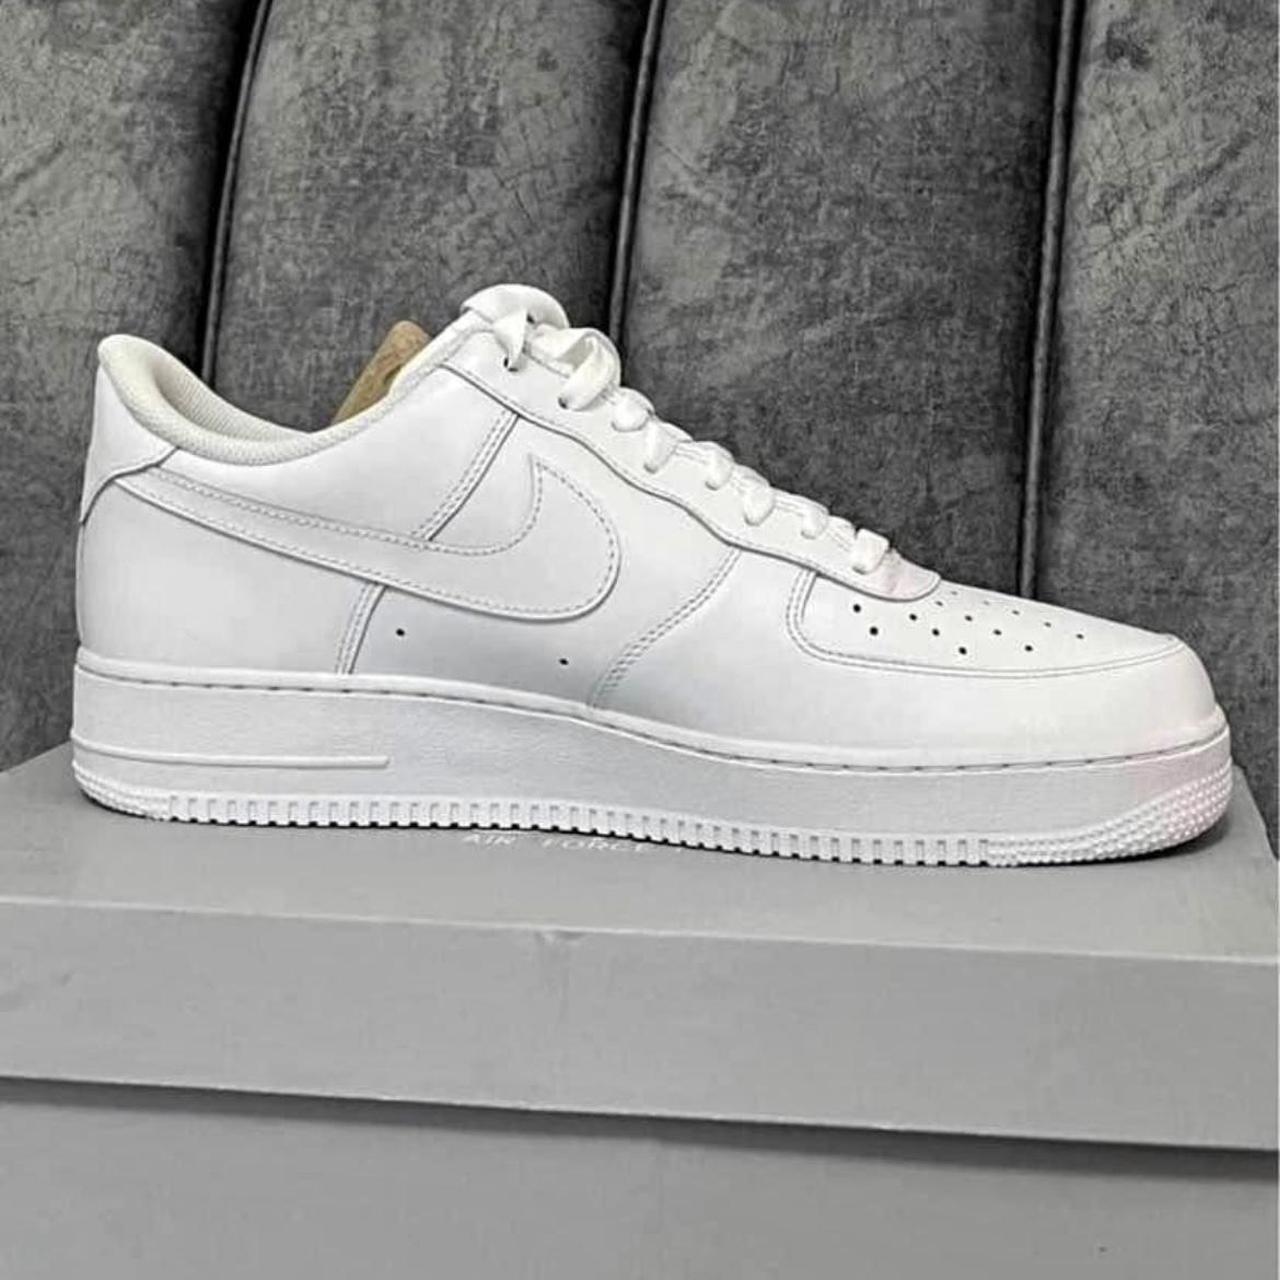 White Air Force 1 Comes with the box‼️ Sizes 7-9... - Depop